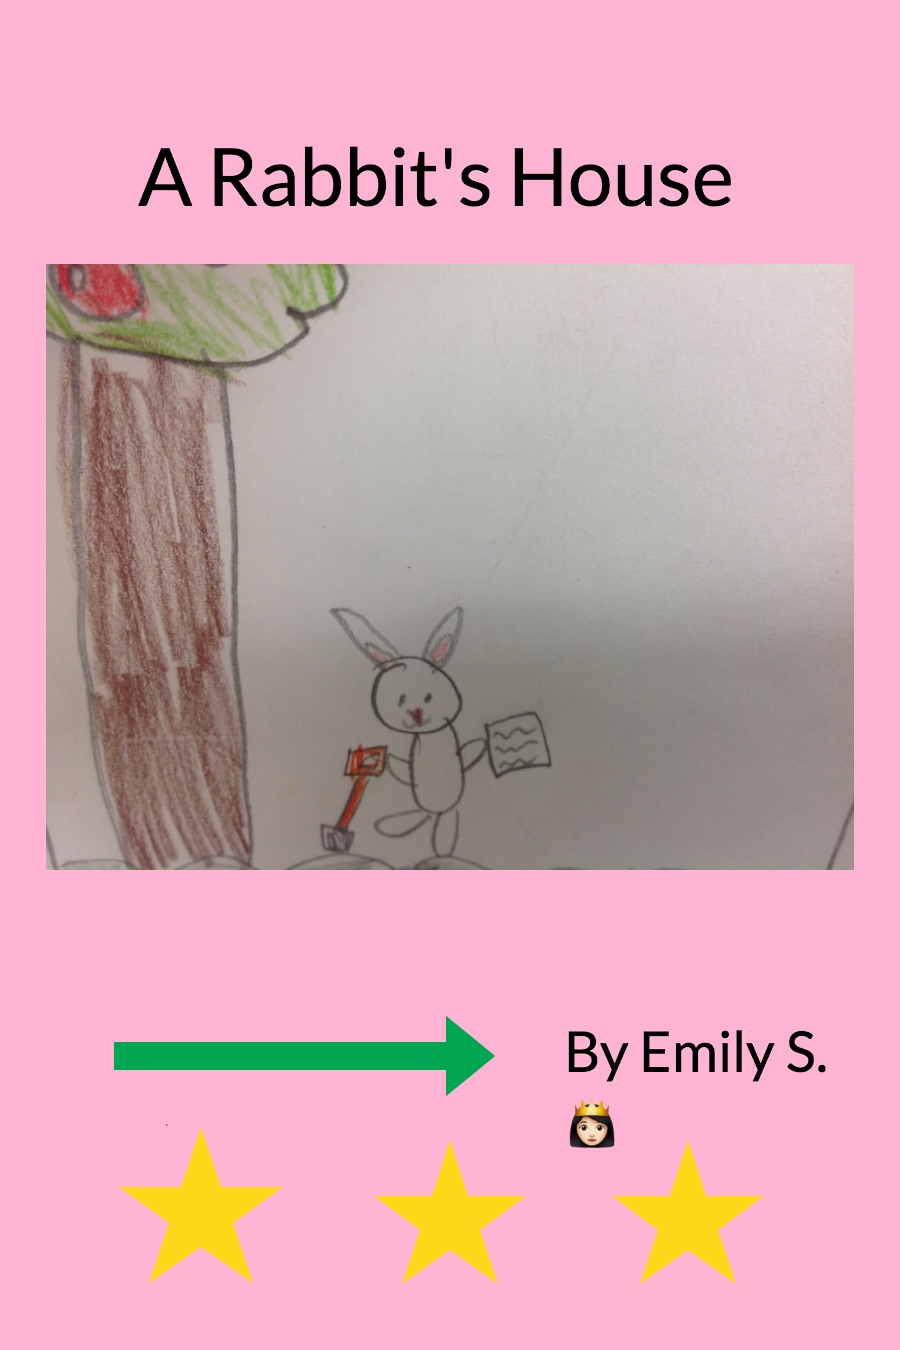 A Rabbit’s House by Emily S